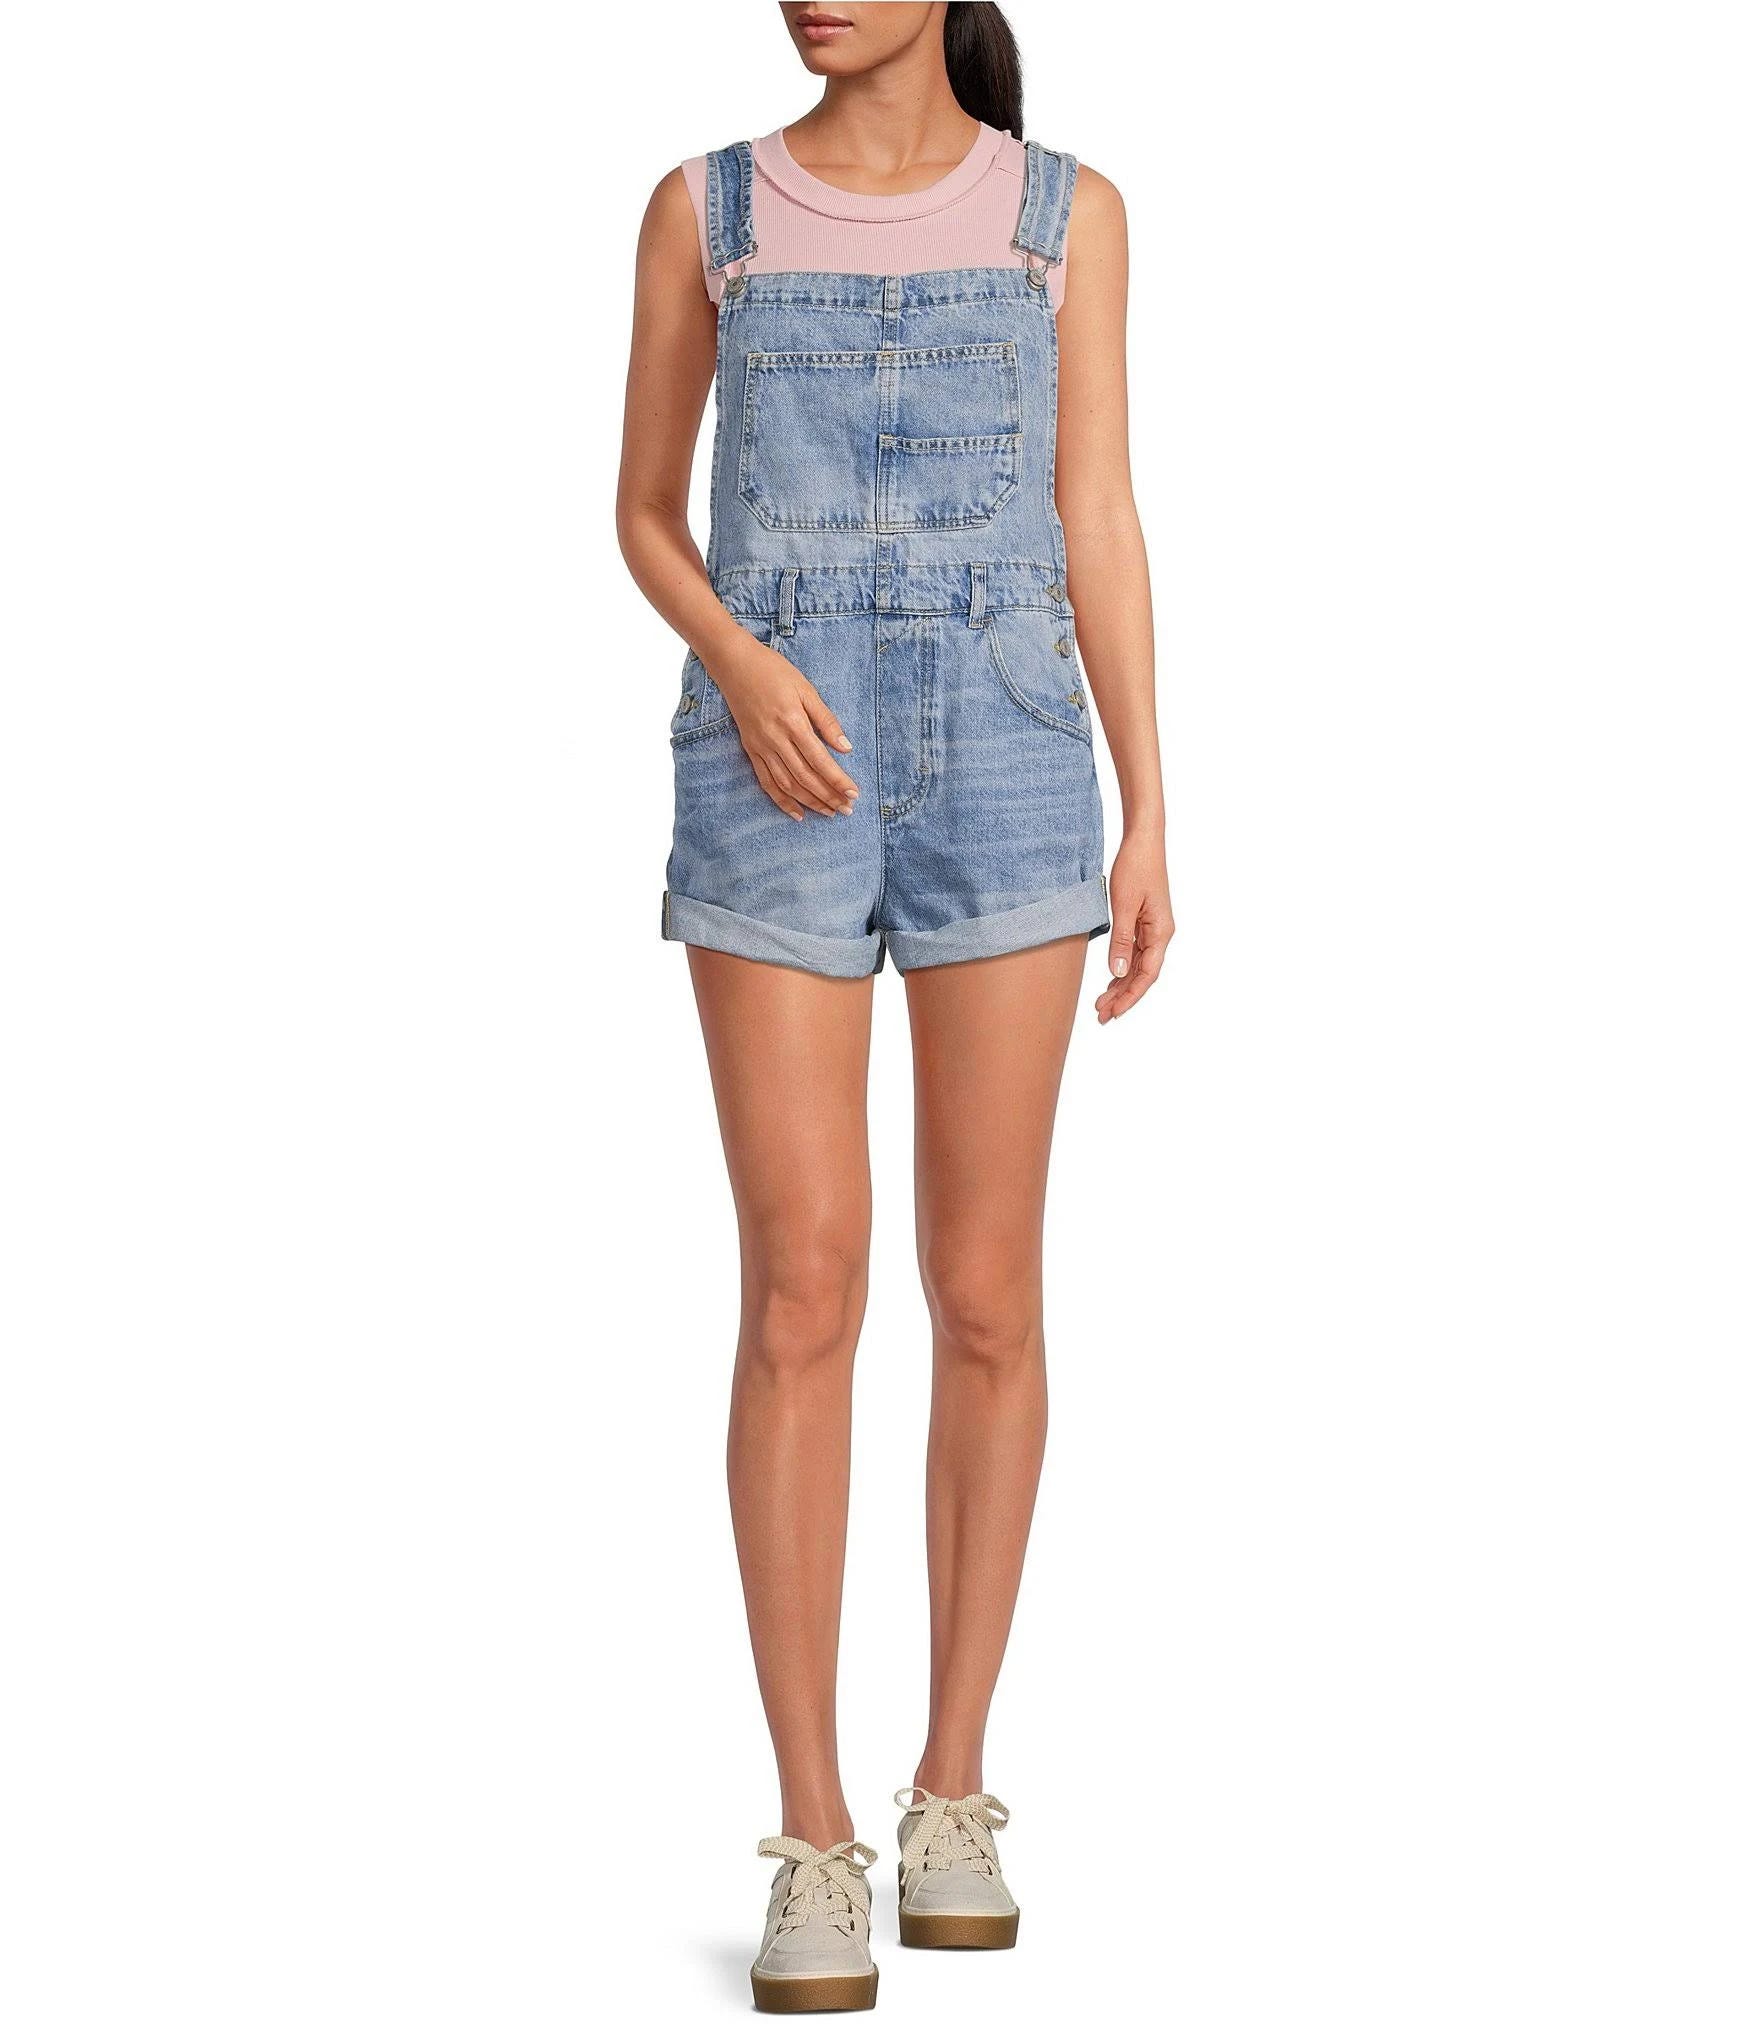 Comfortable Ziggy Shortall Jean Jumper - Denim Overalls for a Relaxed Style | Image